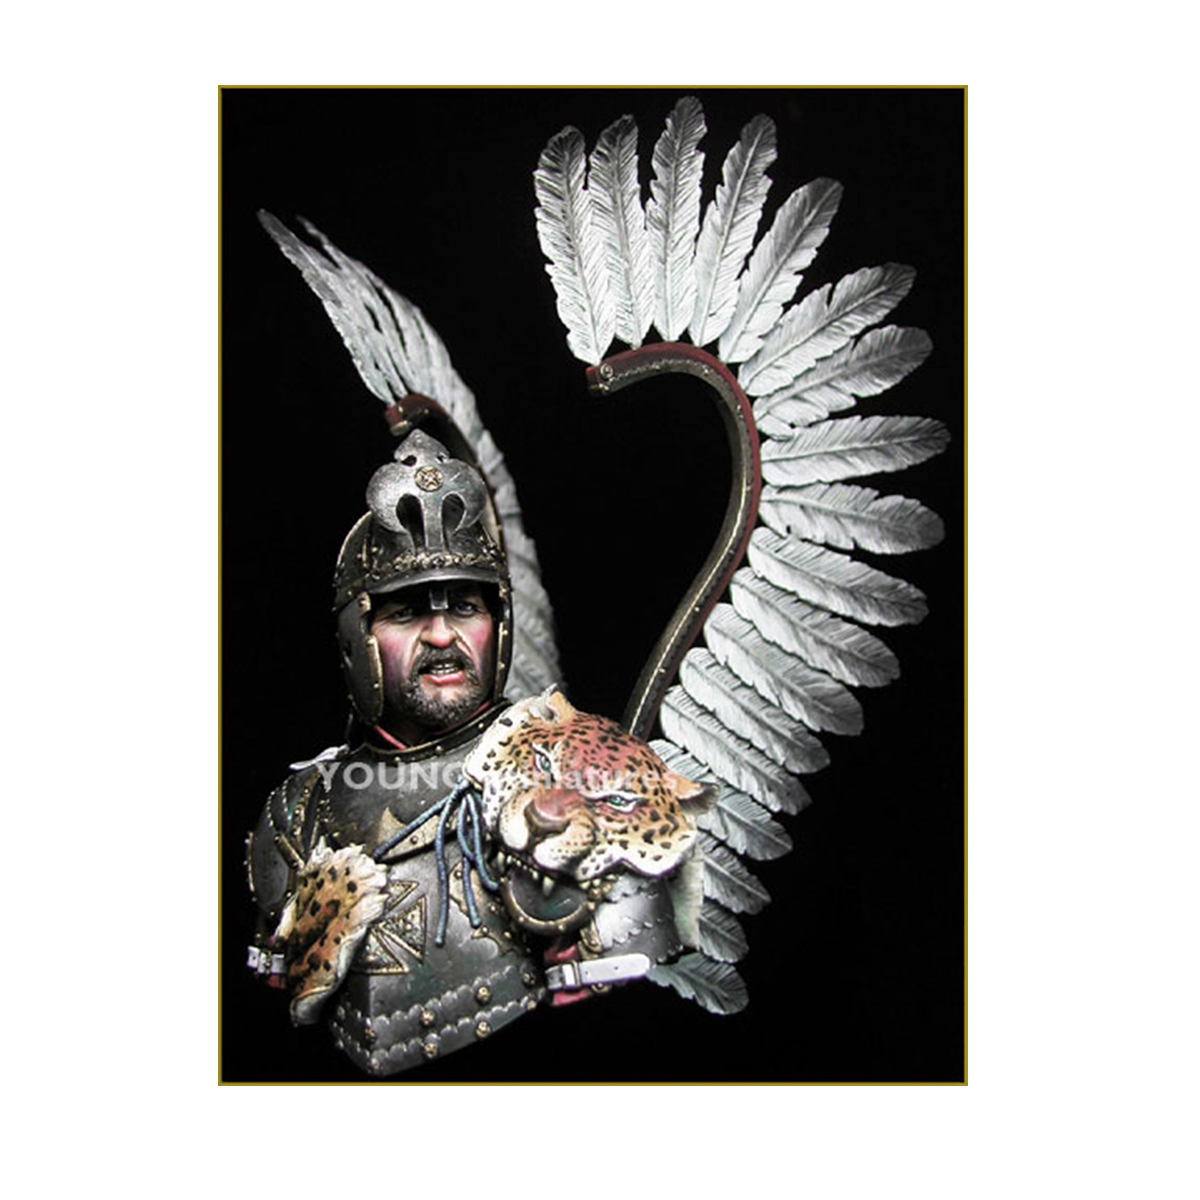 POLISH WINGED HUSSAR 17TH CENTRY